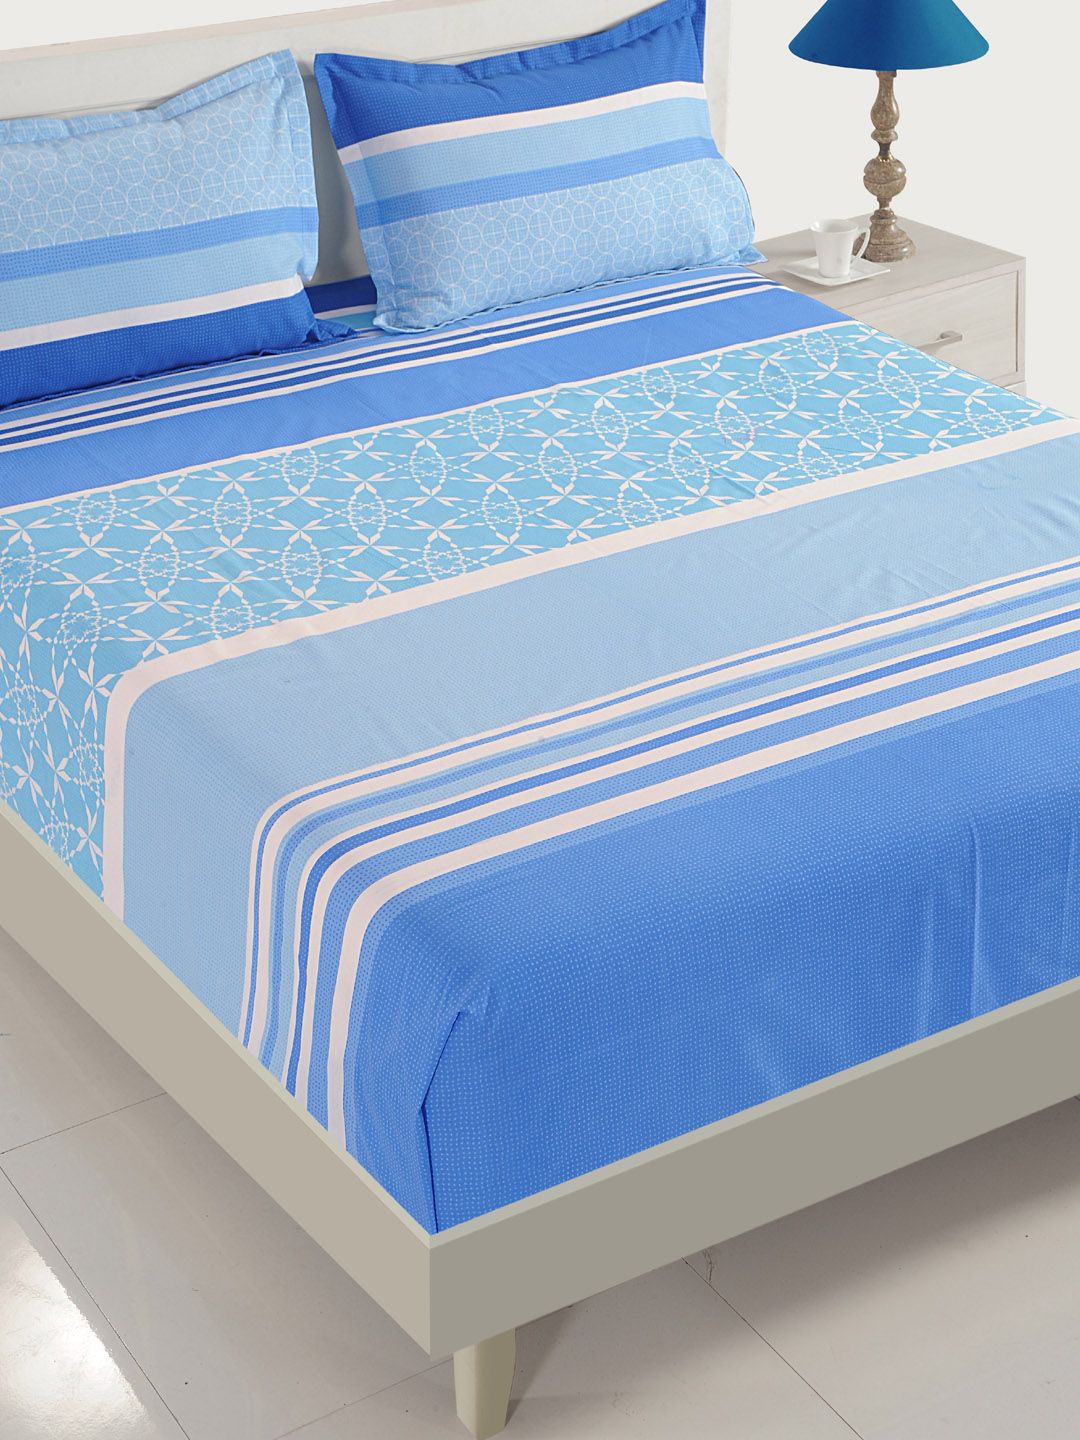 SWAYAM Blue & White Striped Fitted 144 TC Cotton 1 Queen Bedsheet with 2 Pillow Covers Price in India